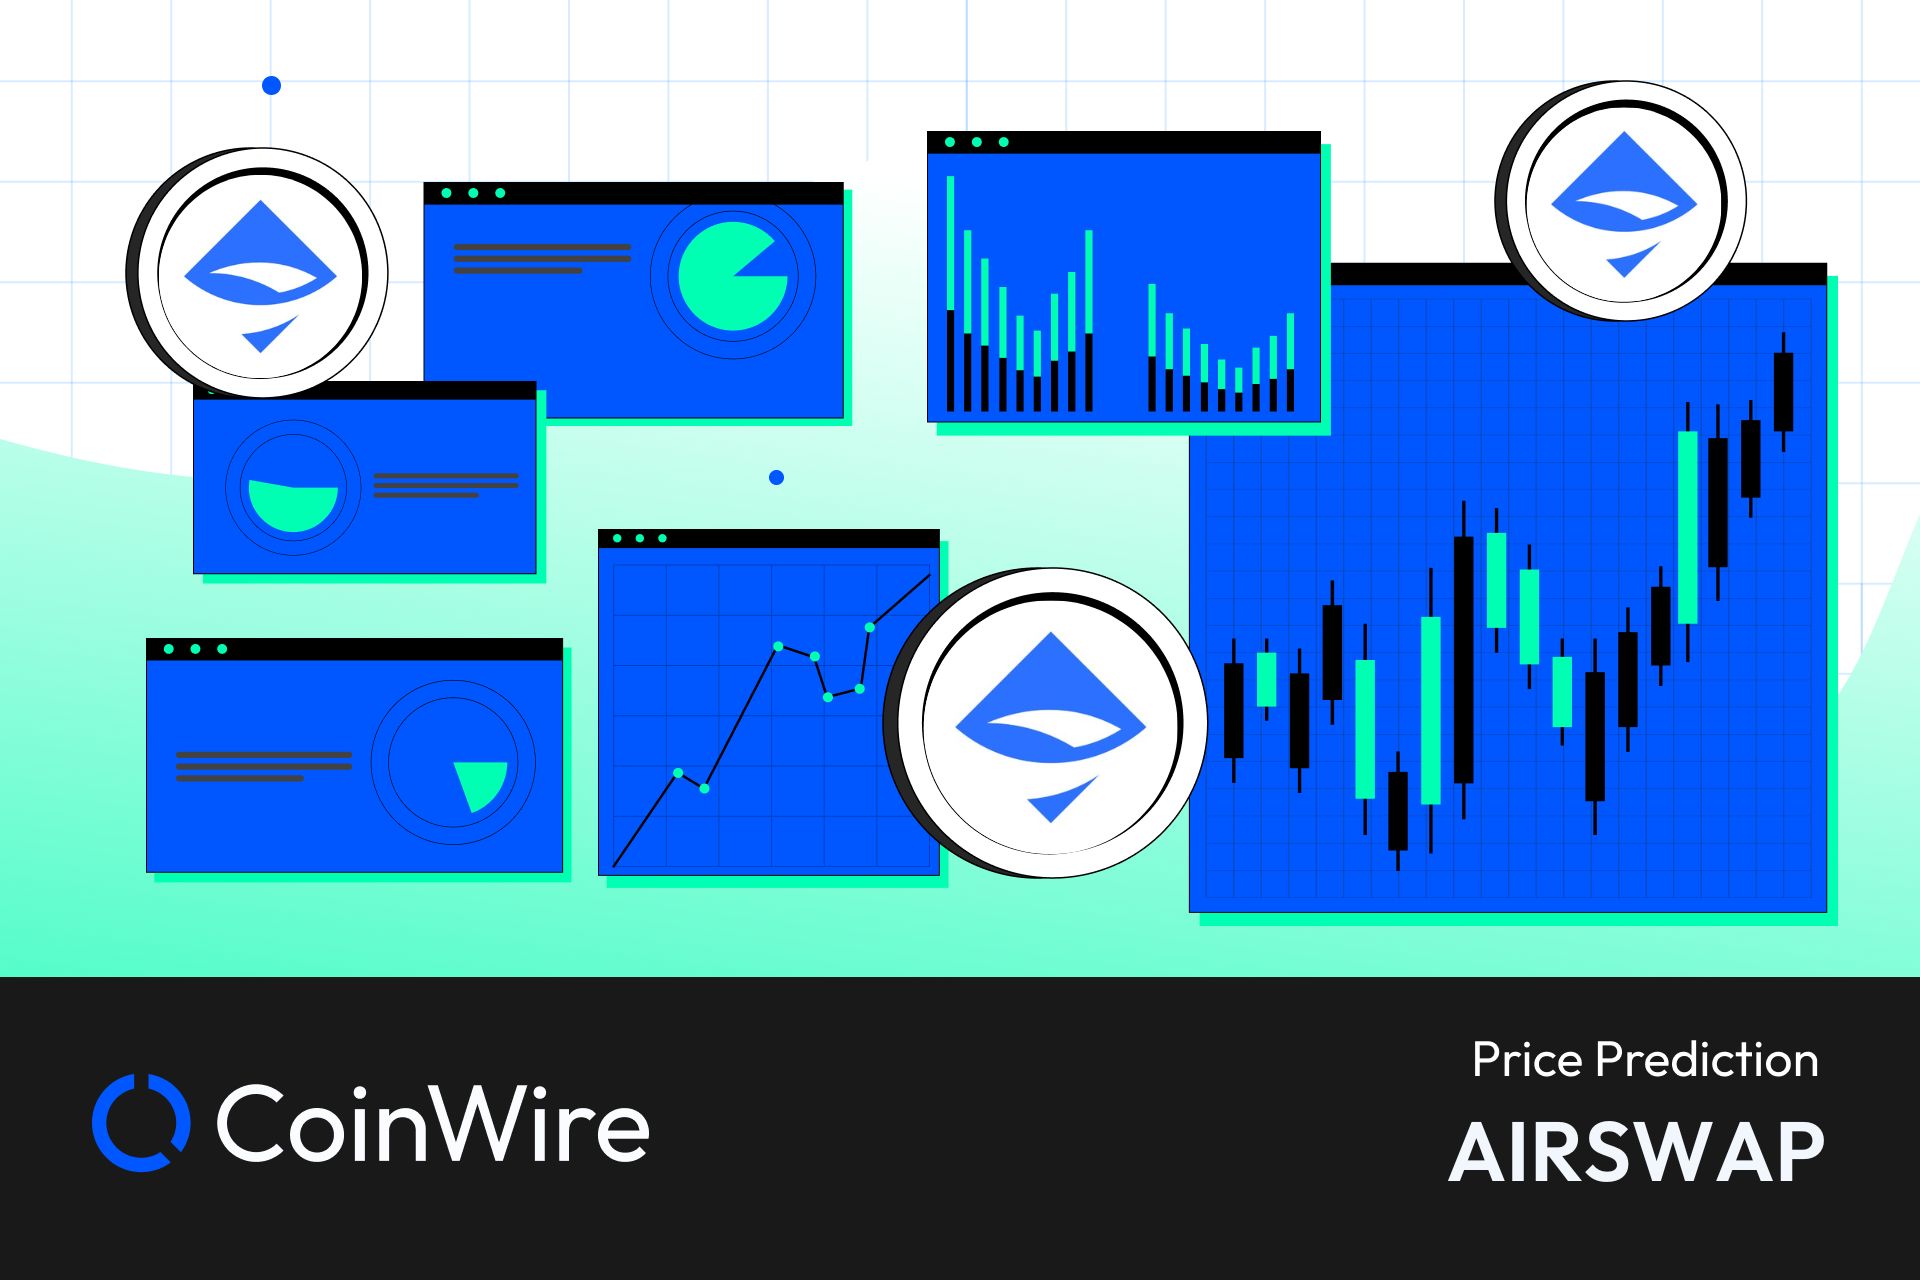 AIRSWAP - AST/USDT - 1H - Londinia Opportunities Analysis published on 02/28/ (GMT)